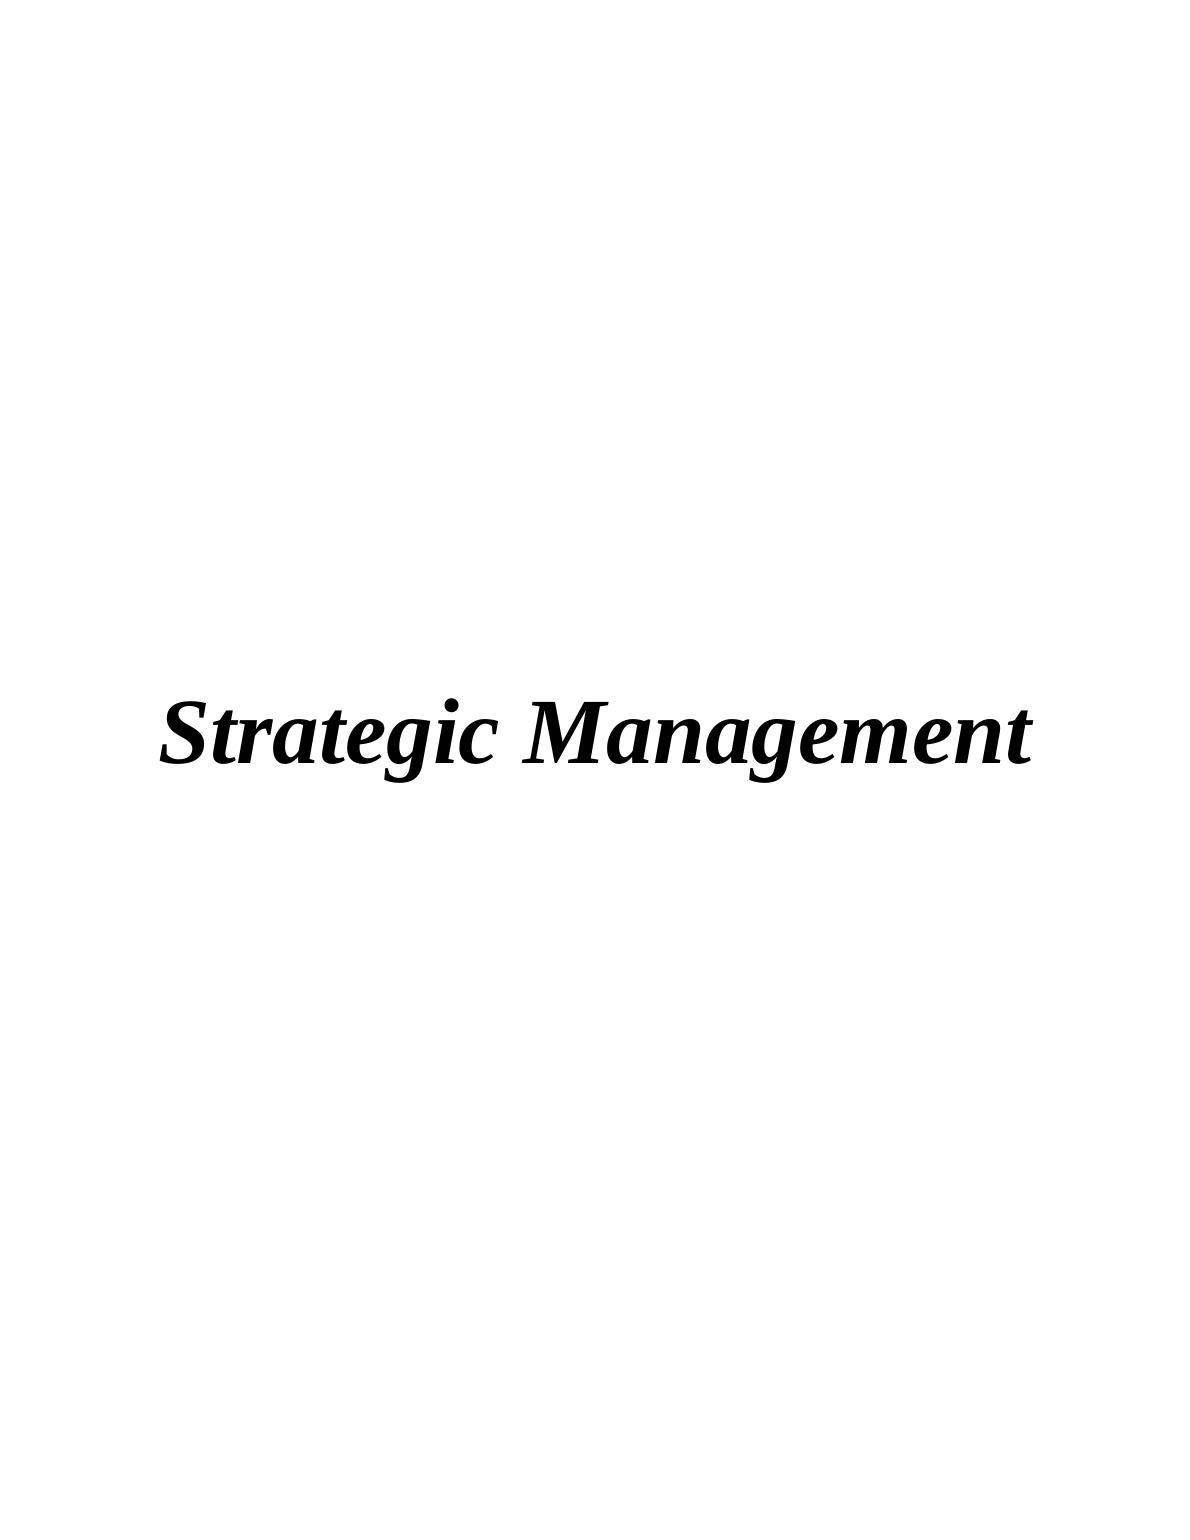 Strategic Management: Analysis of Amazon's Strengths, Weaknesses, Opportunities, and Threats_1